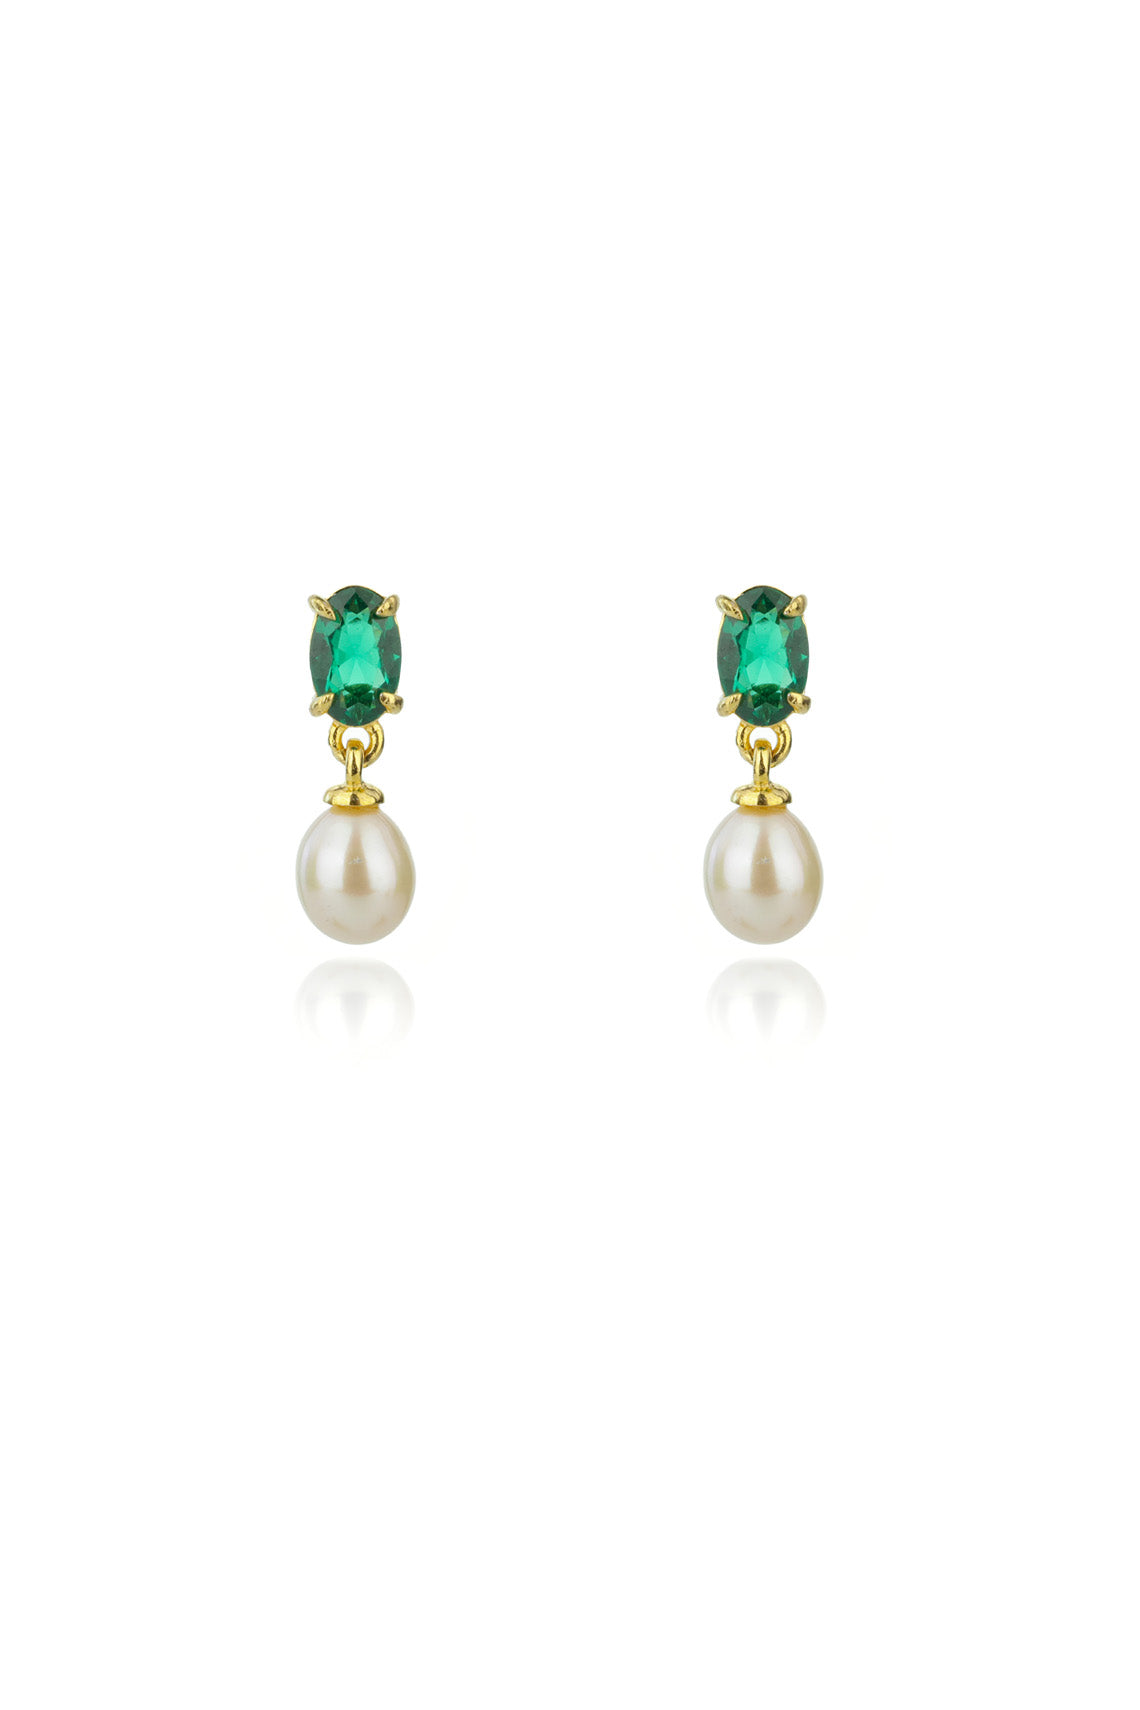 OCEANS WHITSUNDAY EARRINGS EMERALD AND GOLD